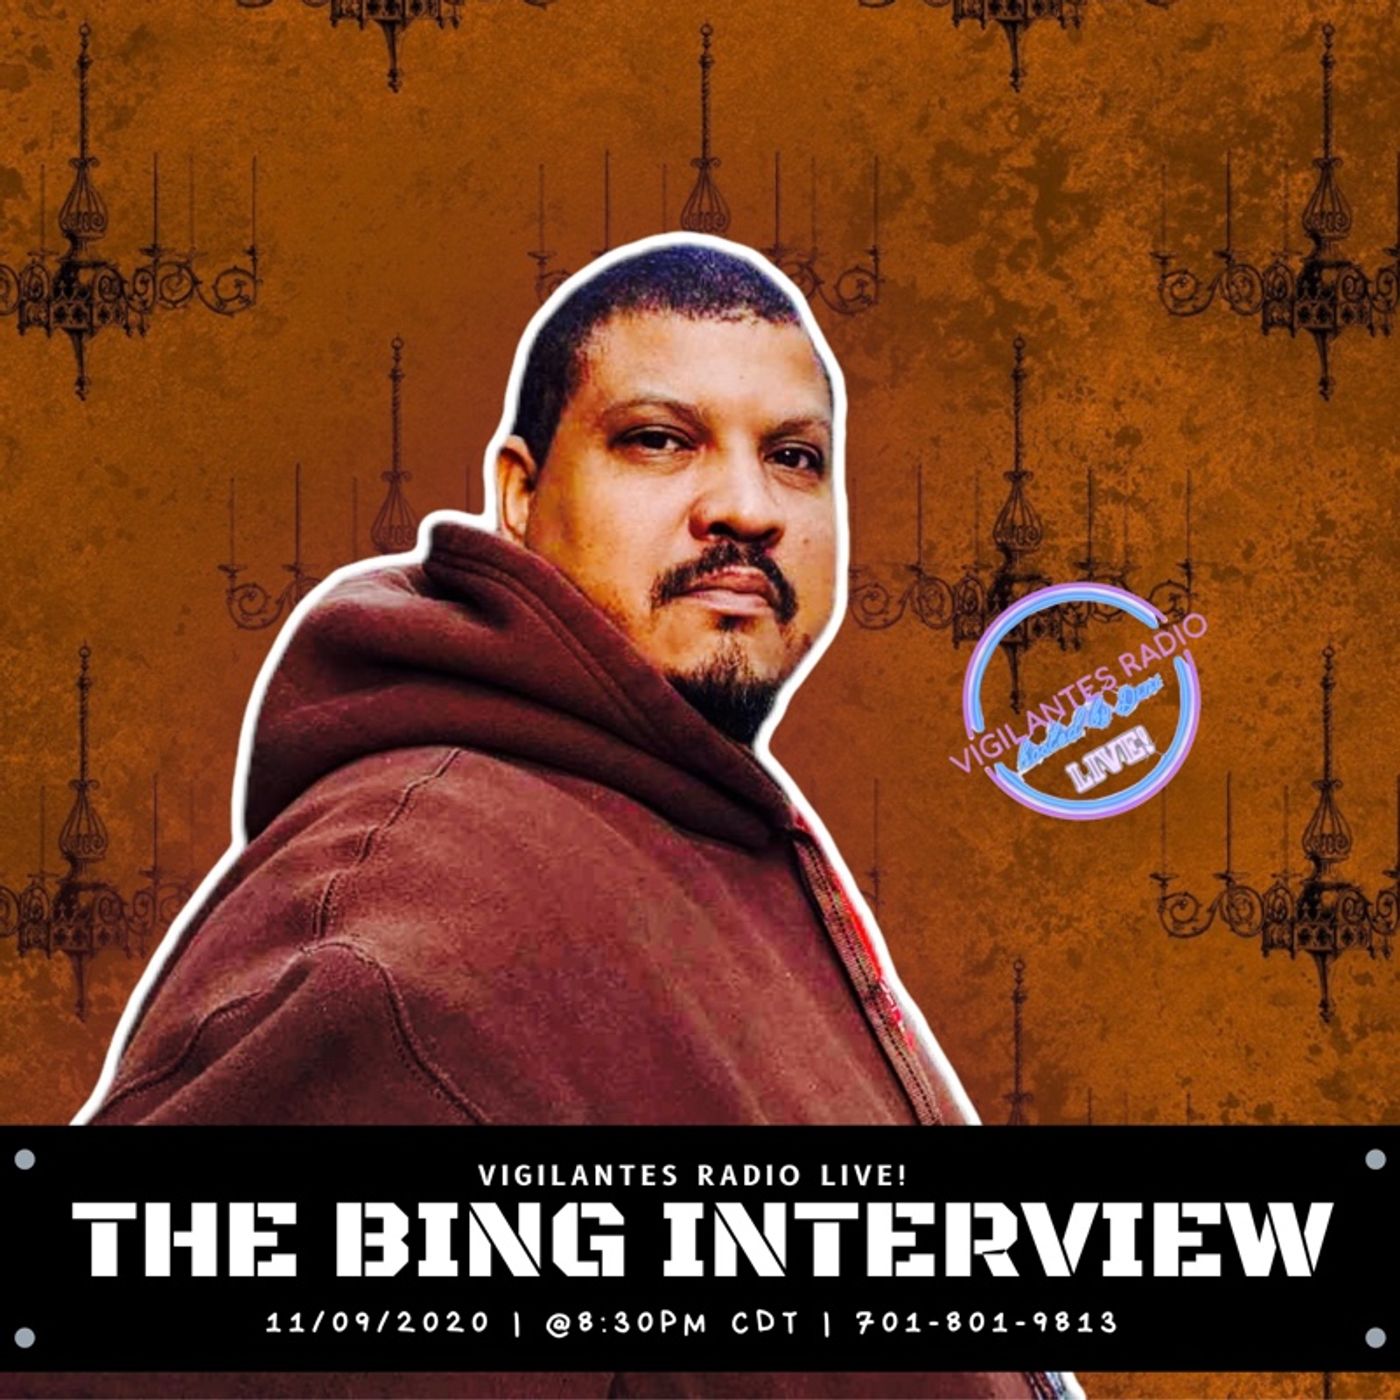 The BiNG Interview. Image